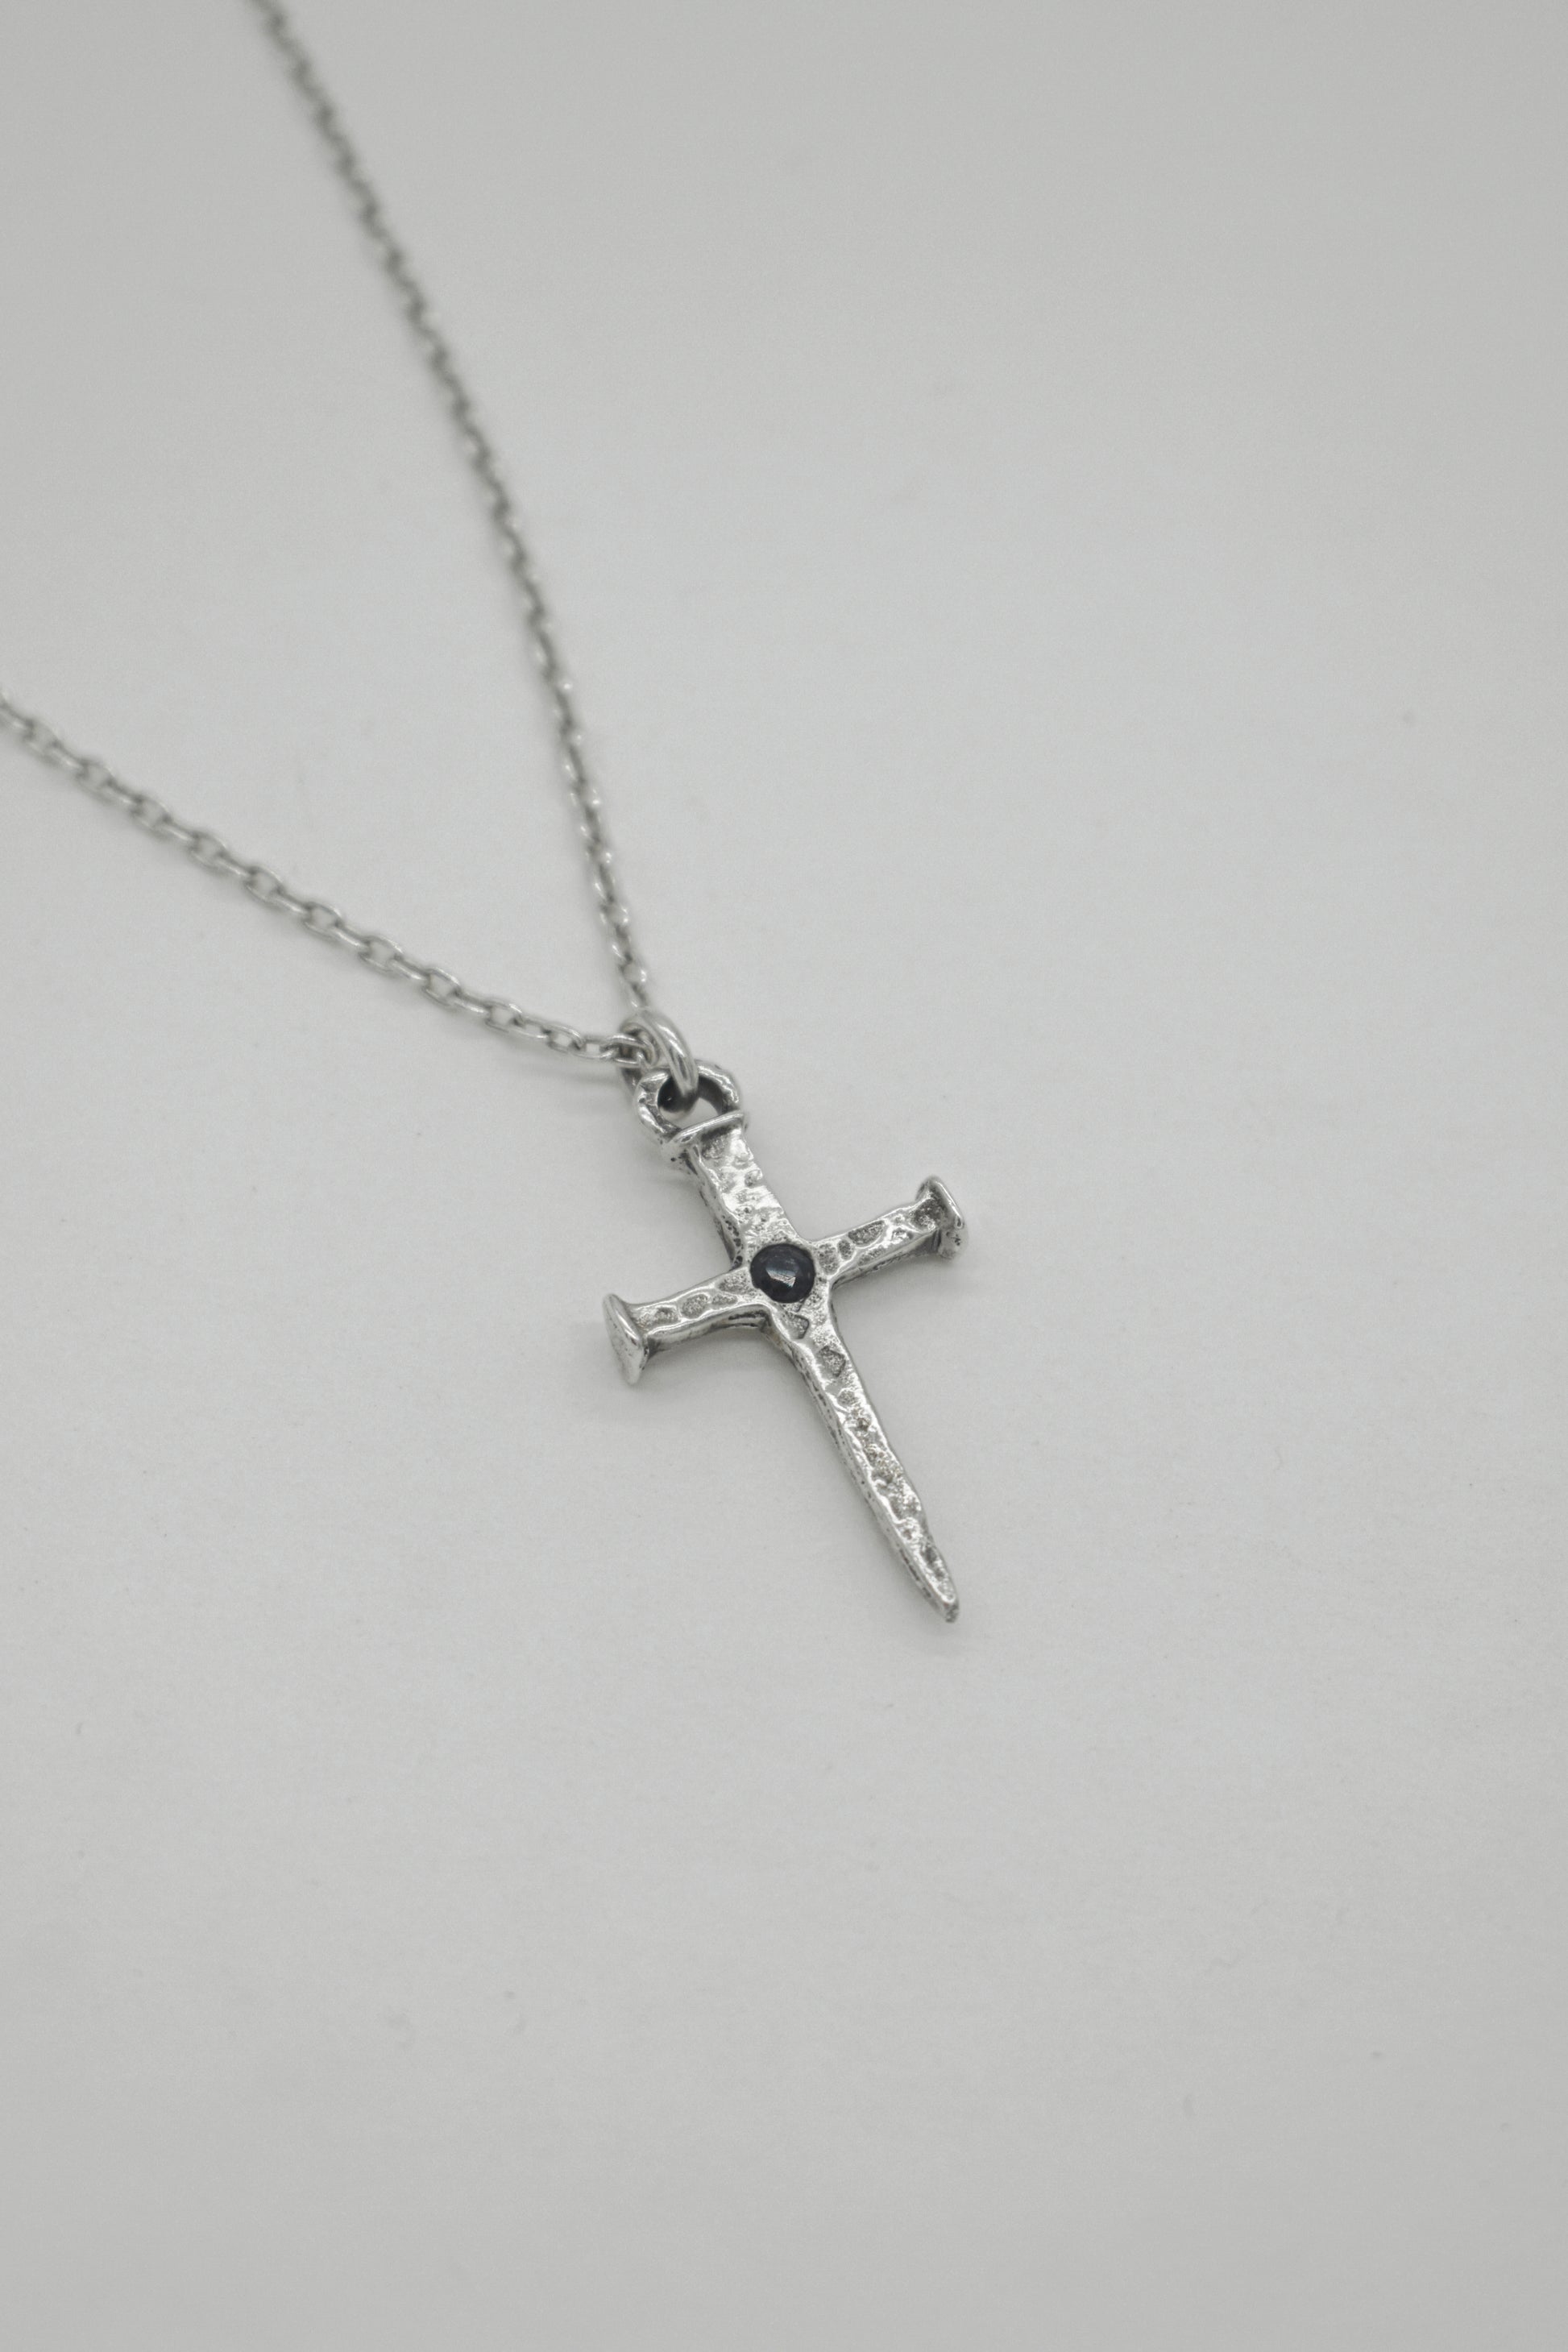 sterling silver oxidised nail cross pendant necklace